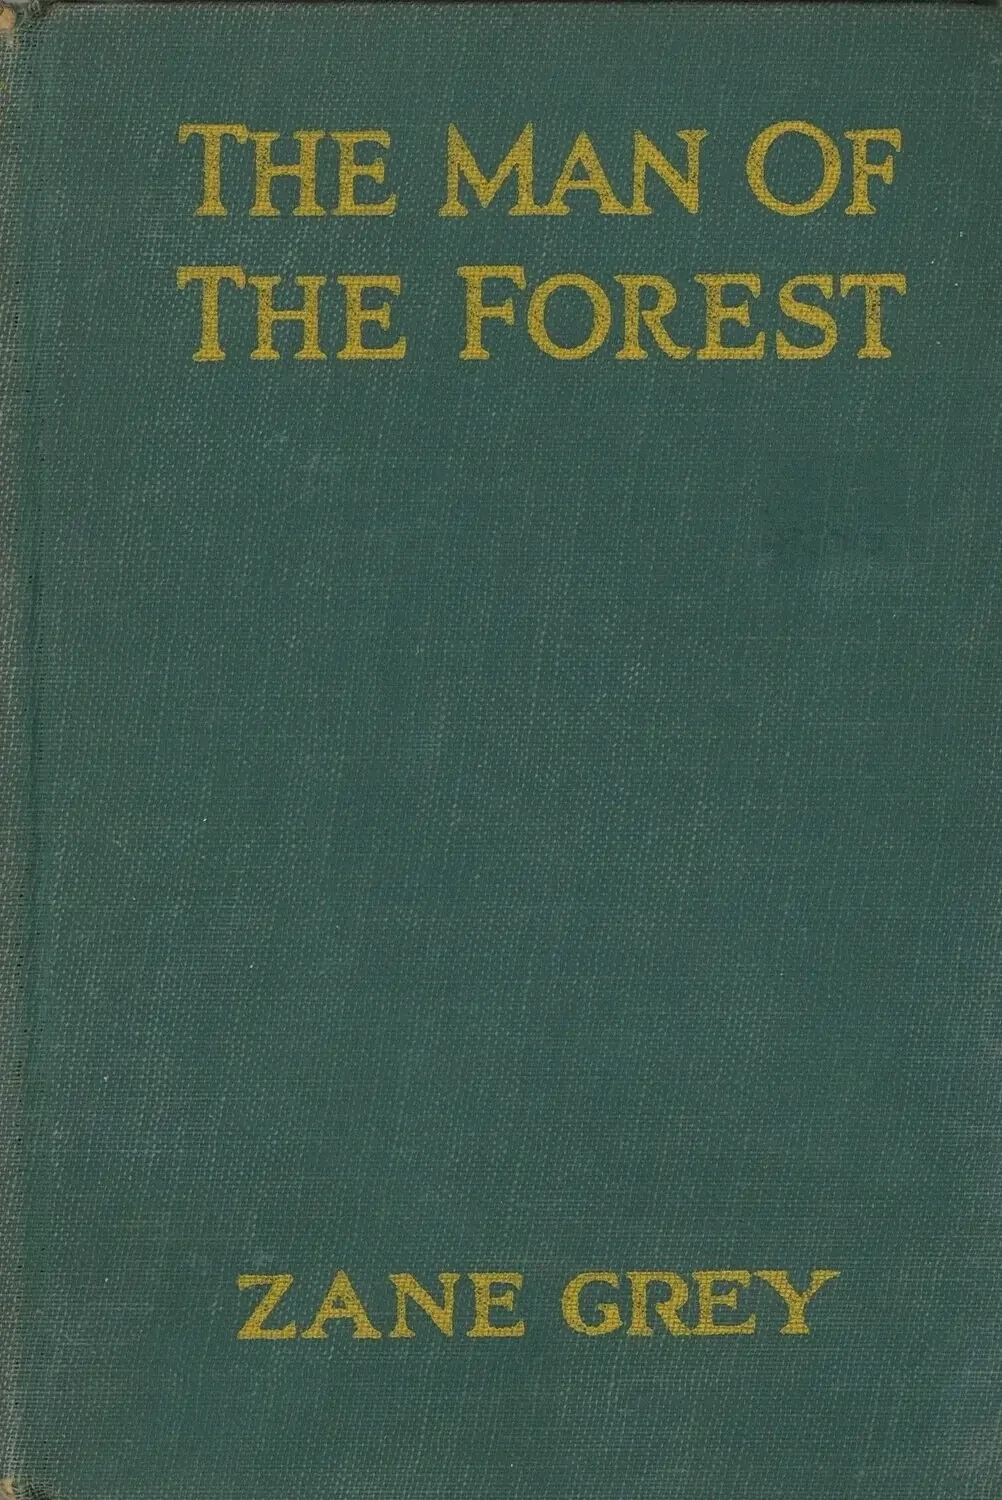 The Man of The Forest, Zane Grey